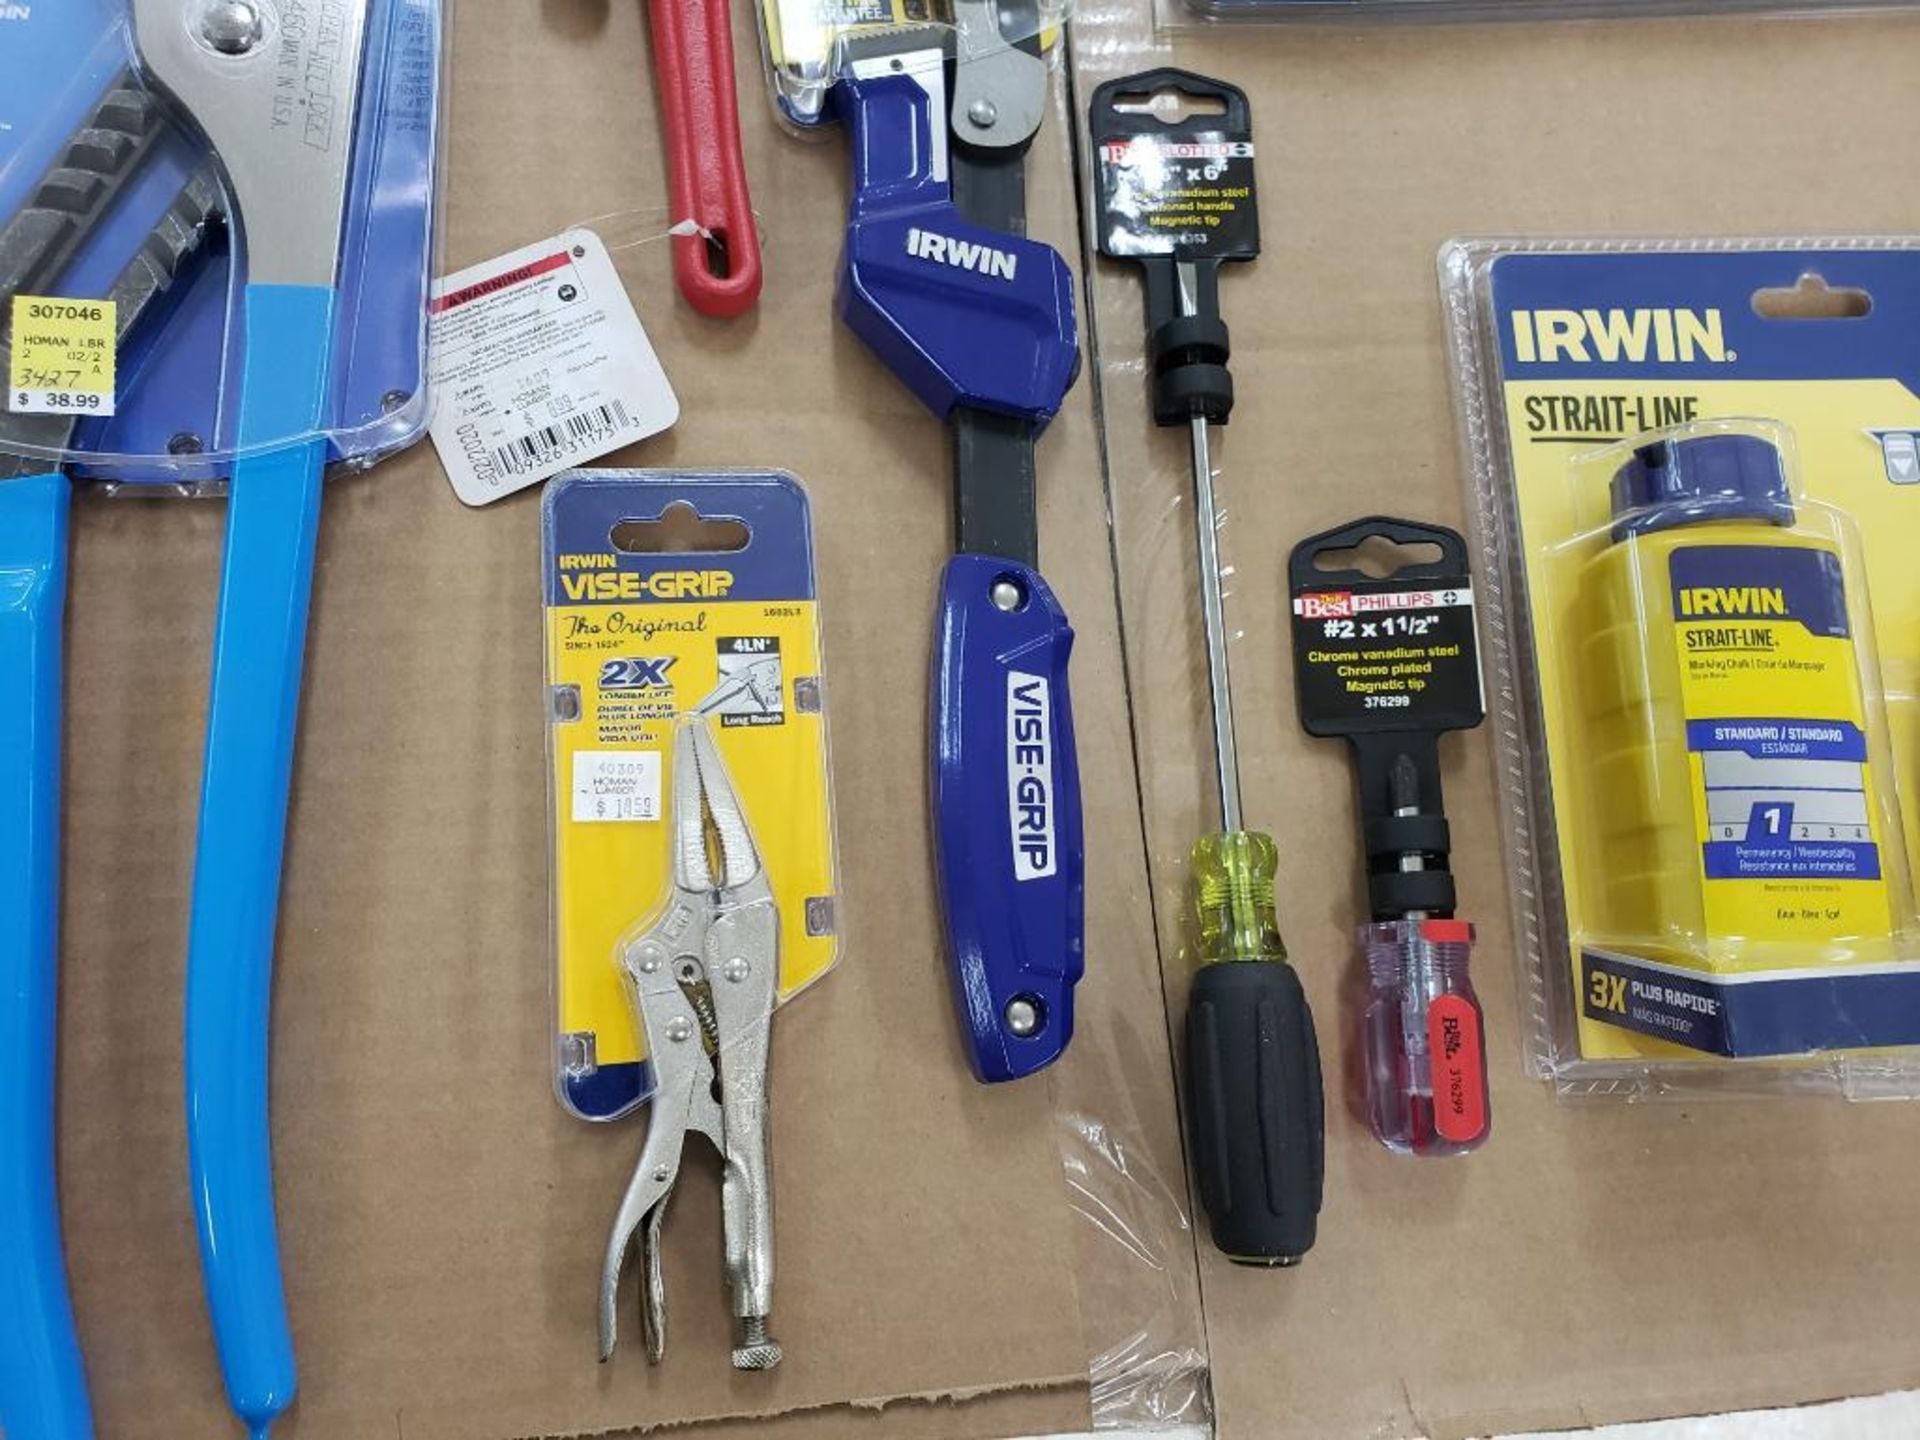 Large assortment of tools. New as pictured. - Image 6 of 7